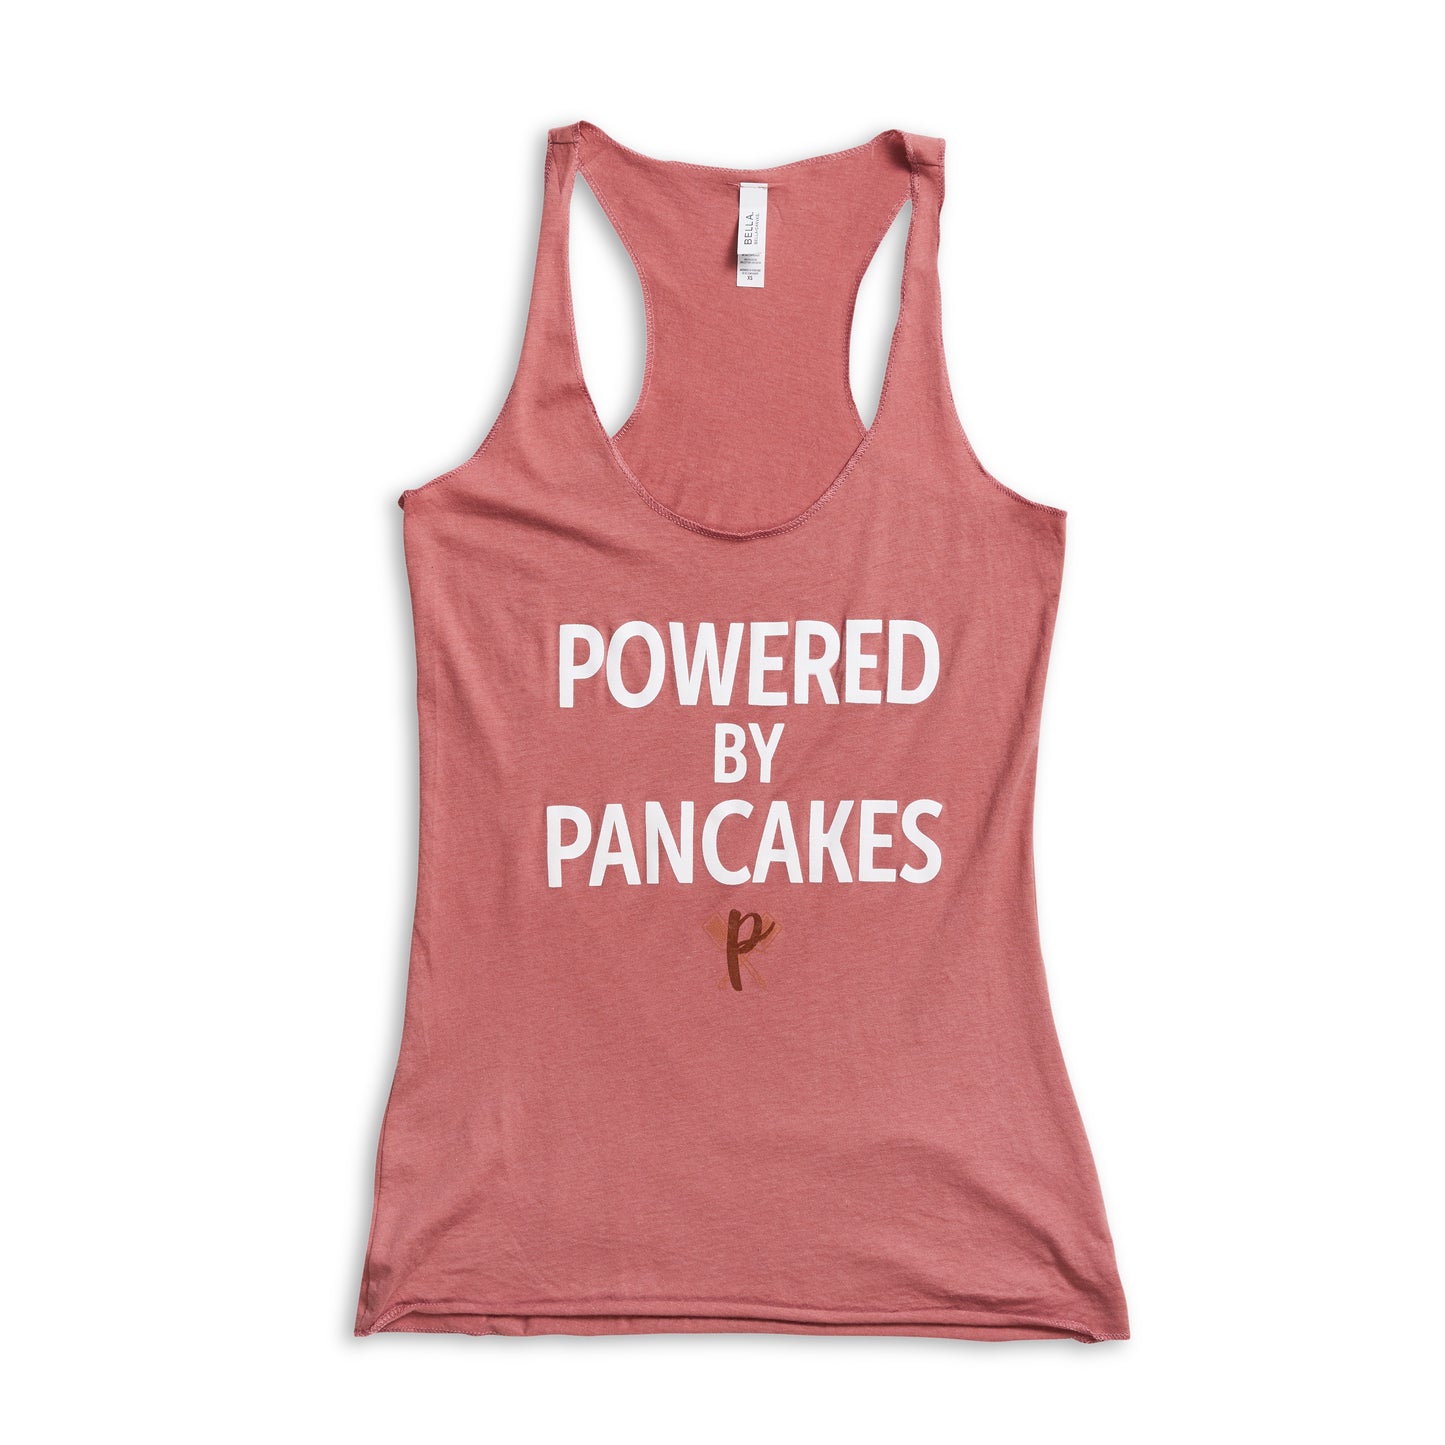 Women’s Full-length Powered by Pancakes Tank Top PINK